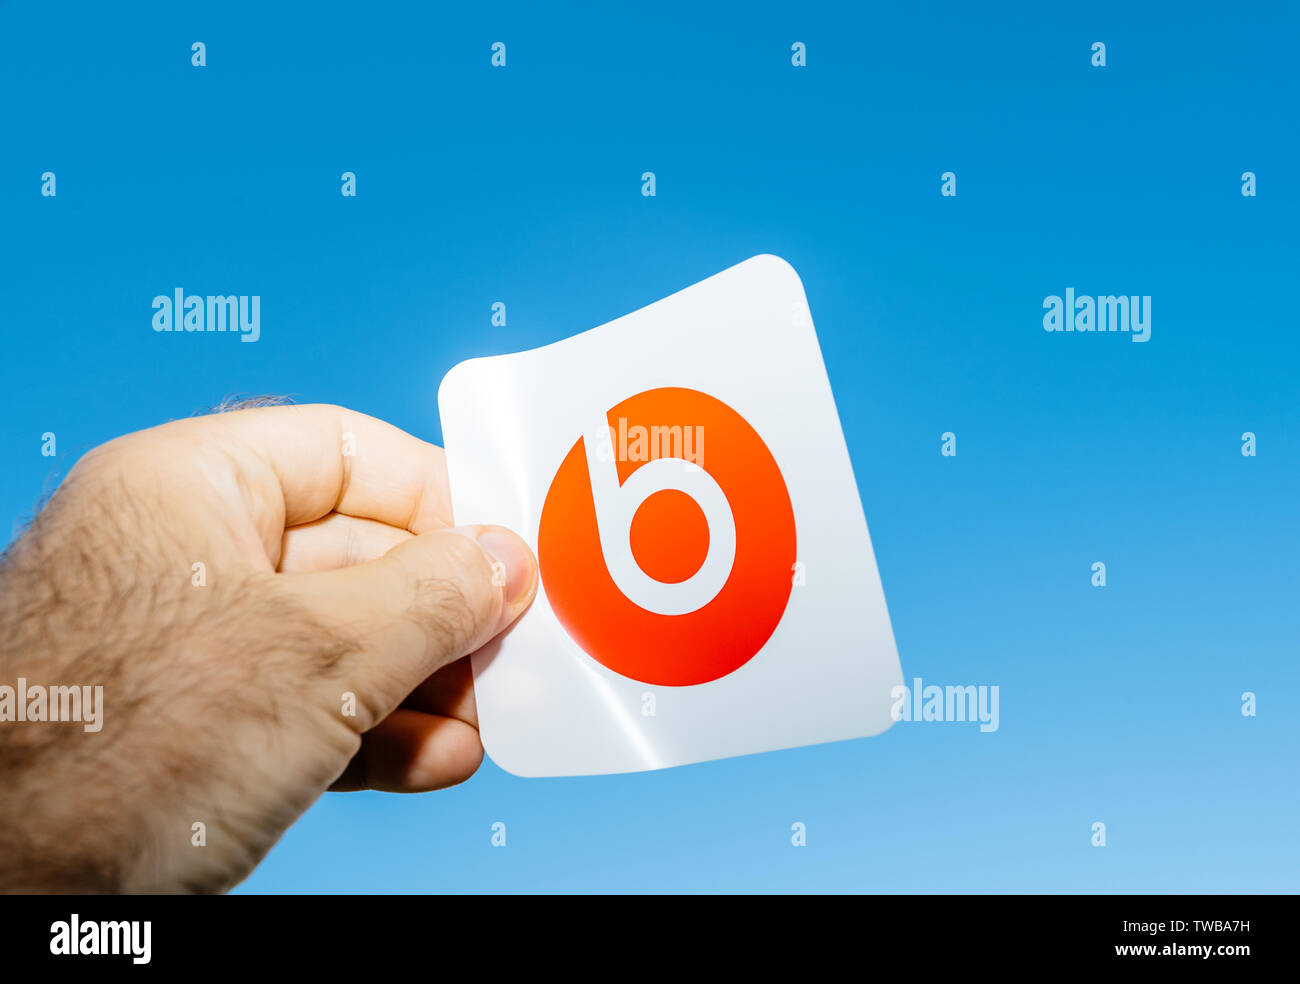 Paris, France - Jun 17, 2019: Man hand holding red sticker with logotype insignia brand during Powerbeats Pro Beats by Dr Dre unboxing - blue clear sky in the background Stock Photo